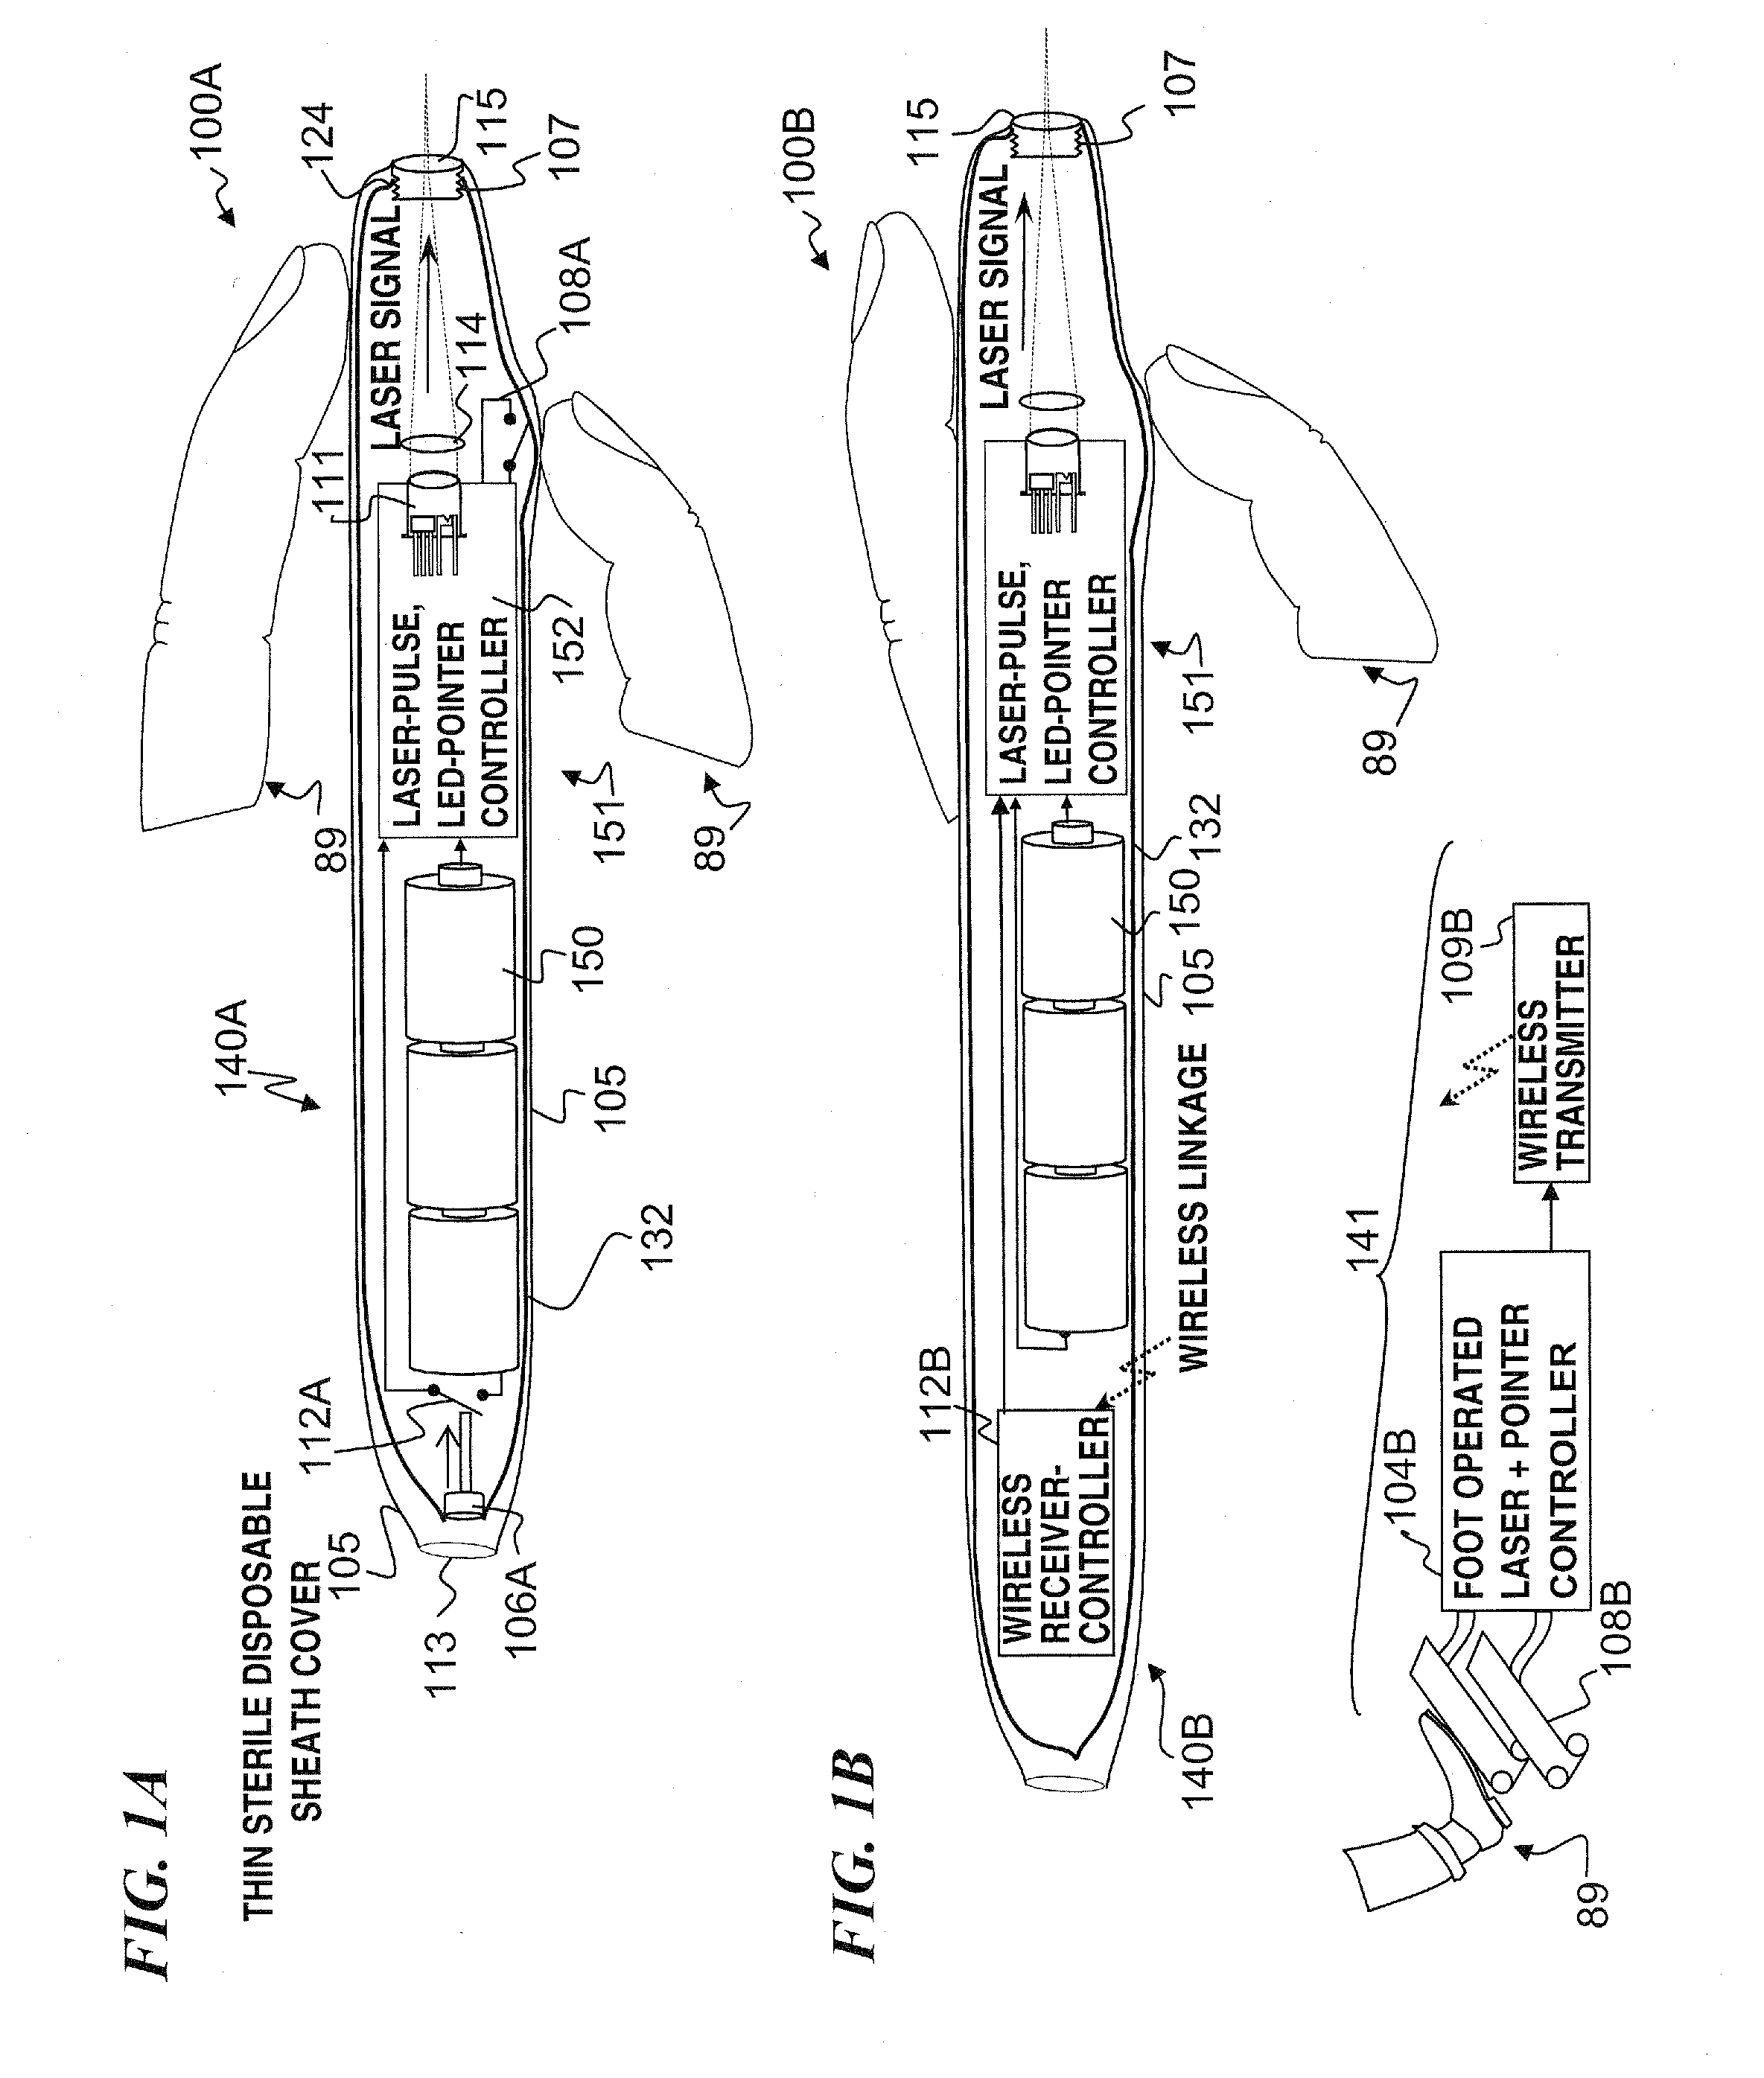 Apparatus and method for stimulation of nerves and automated control of surgical instruments